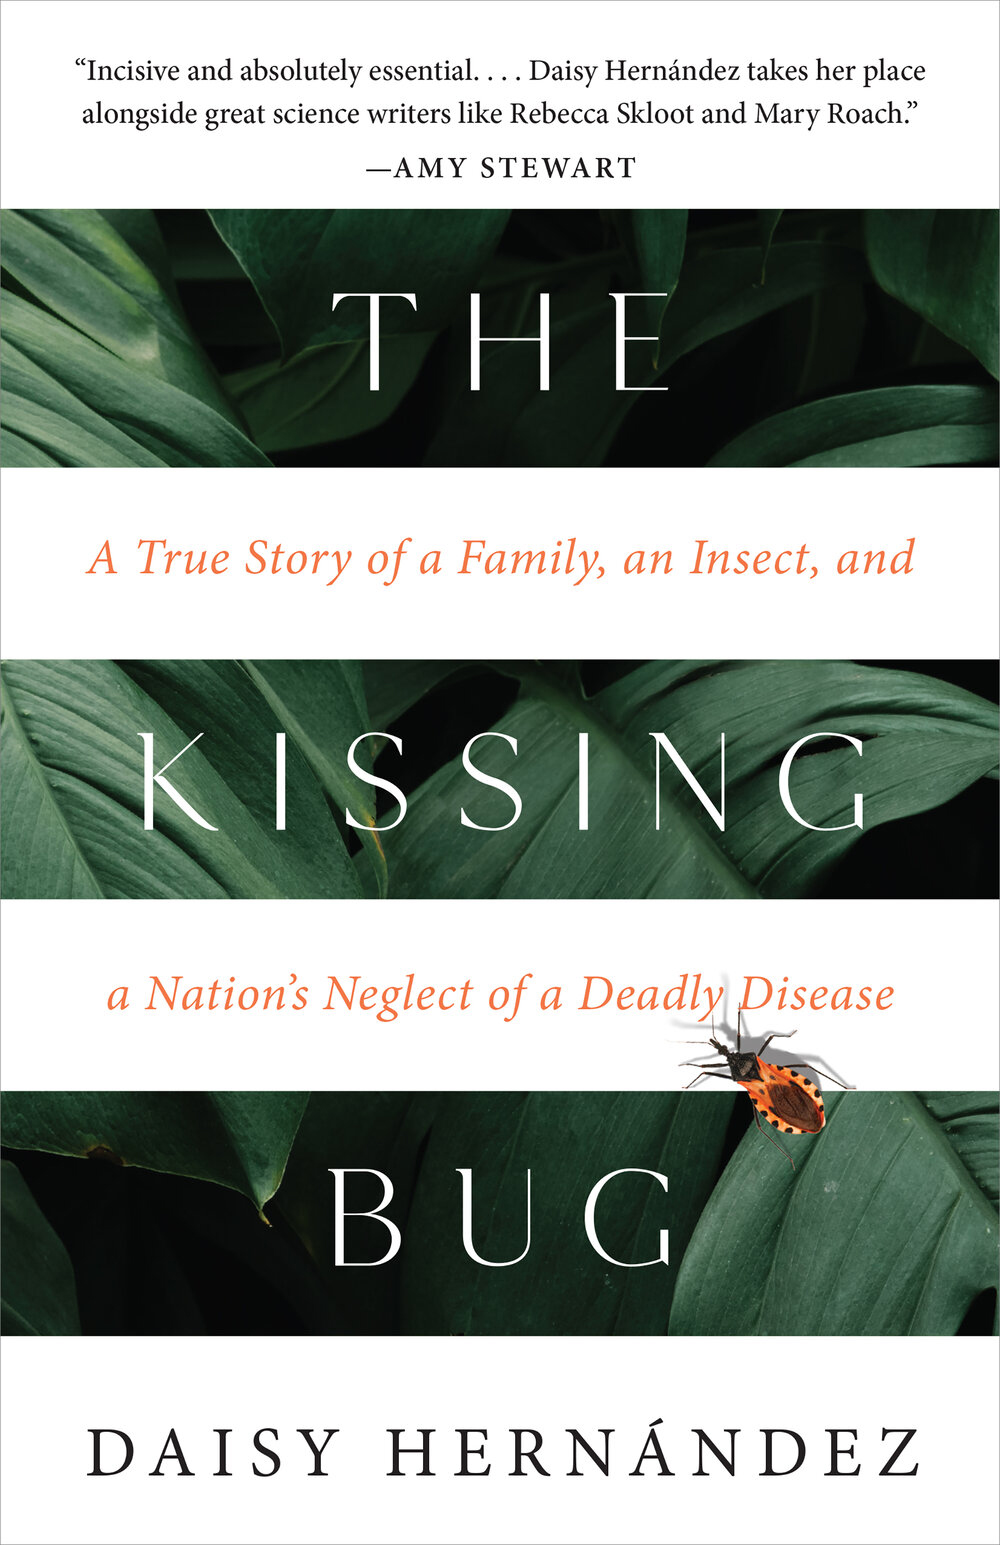 Cover of Daisy's book: The Kissing Bug